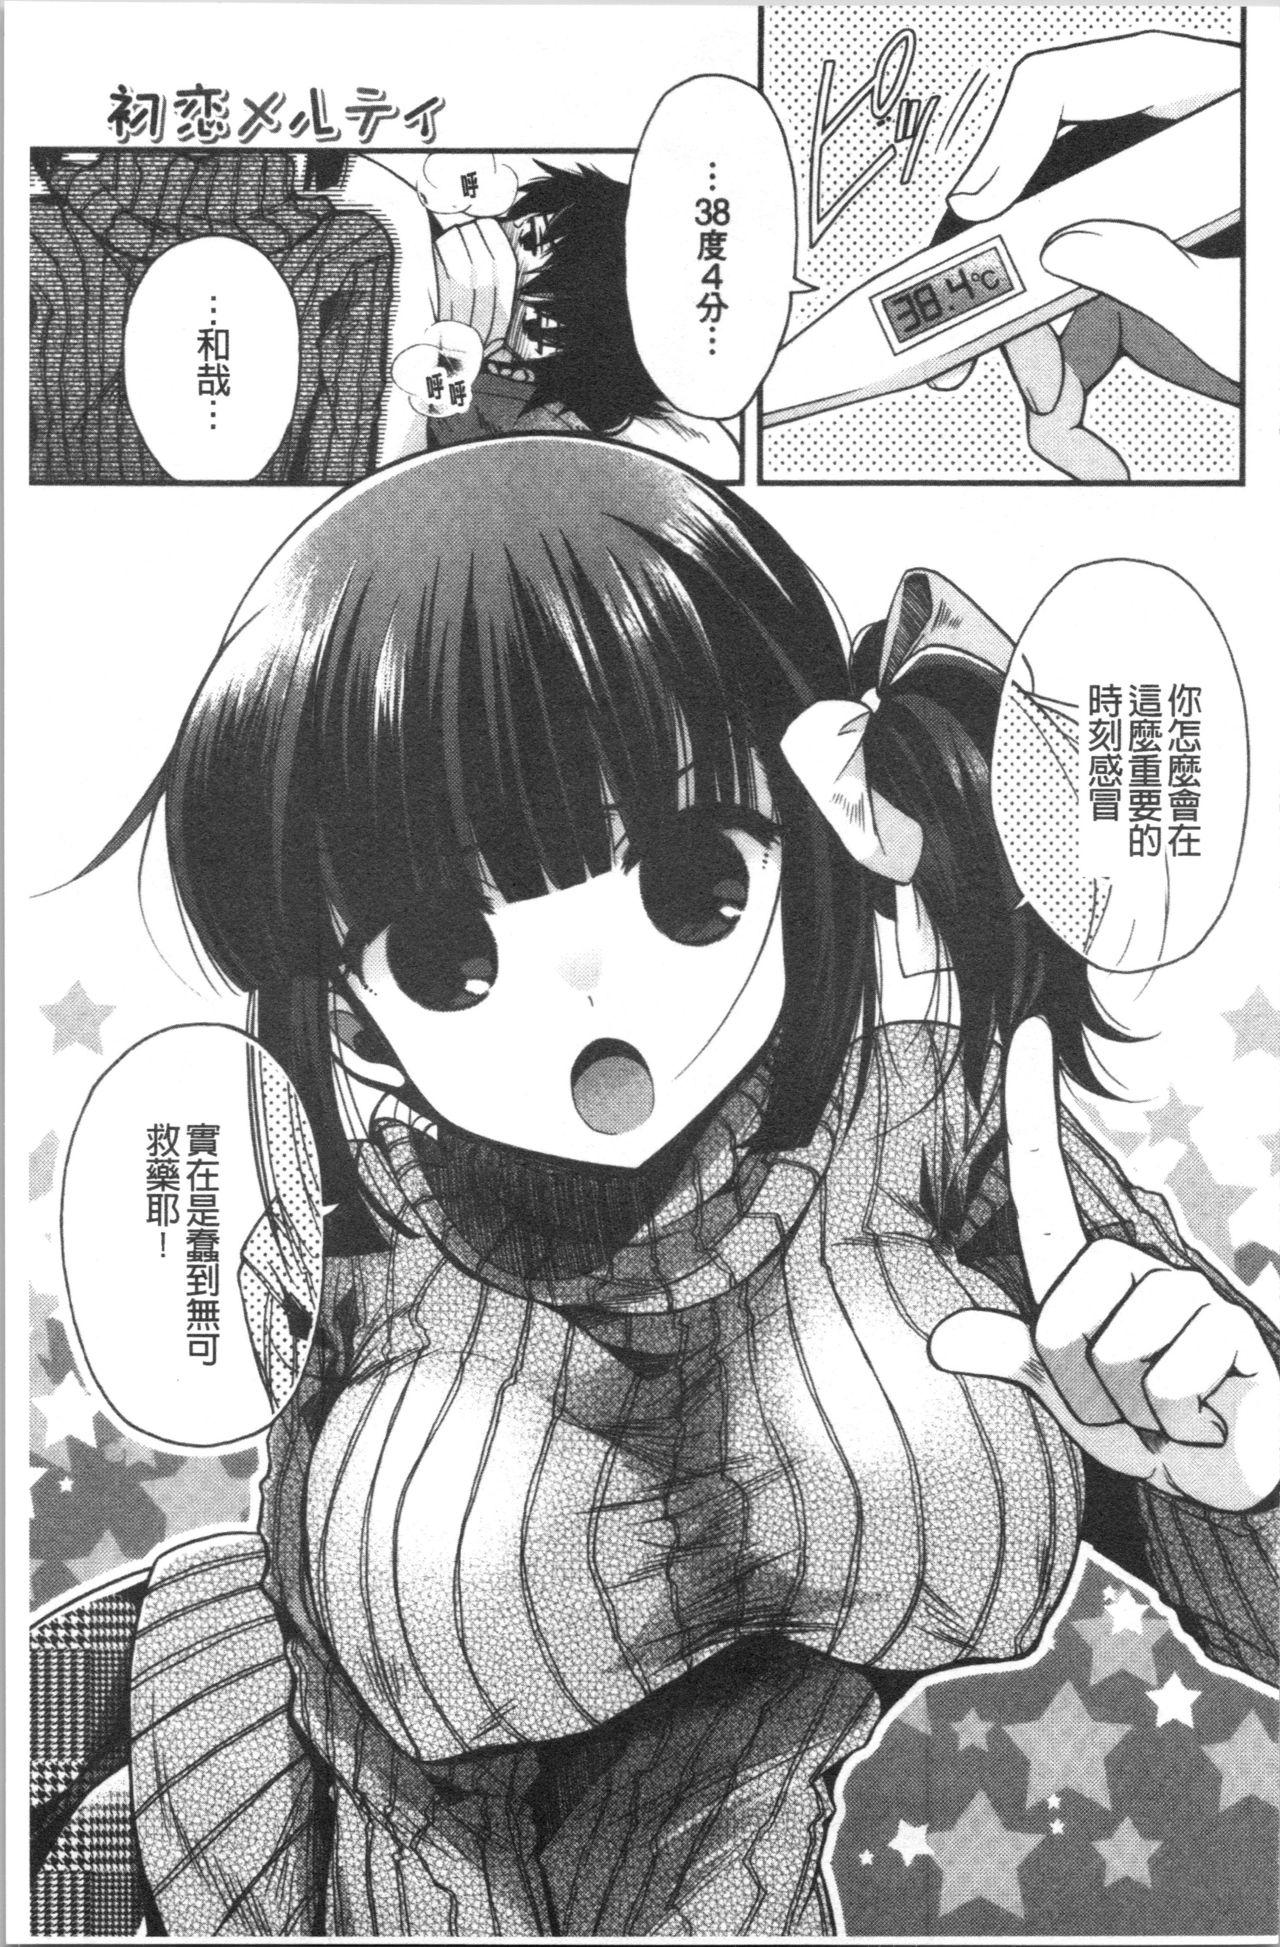 Hatsukoi Melty - Melty First Love 156